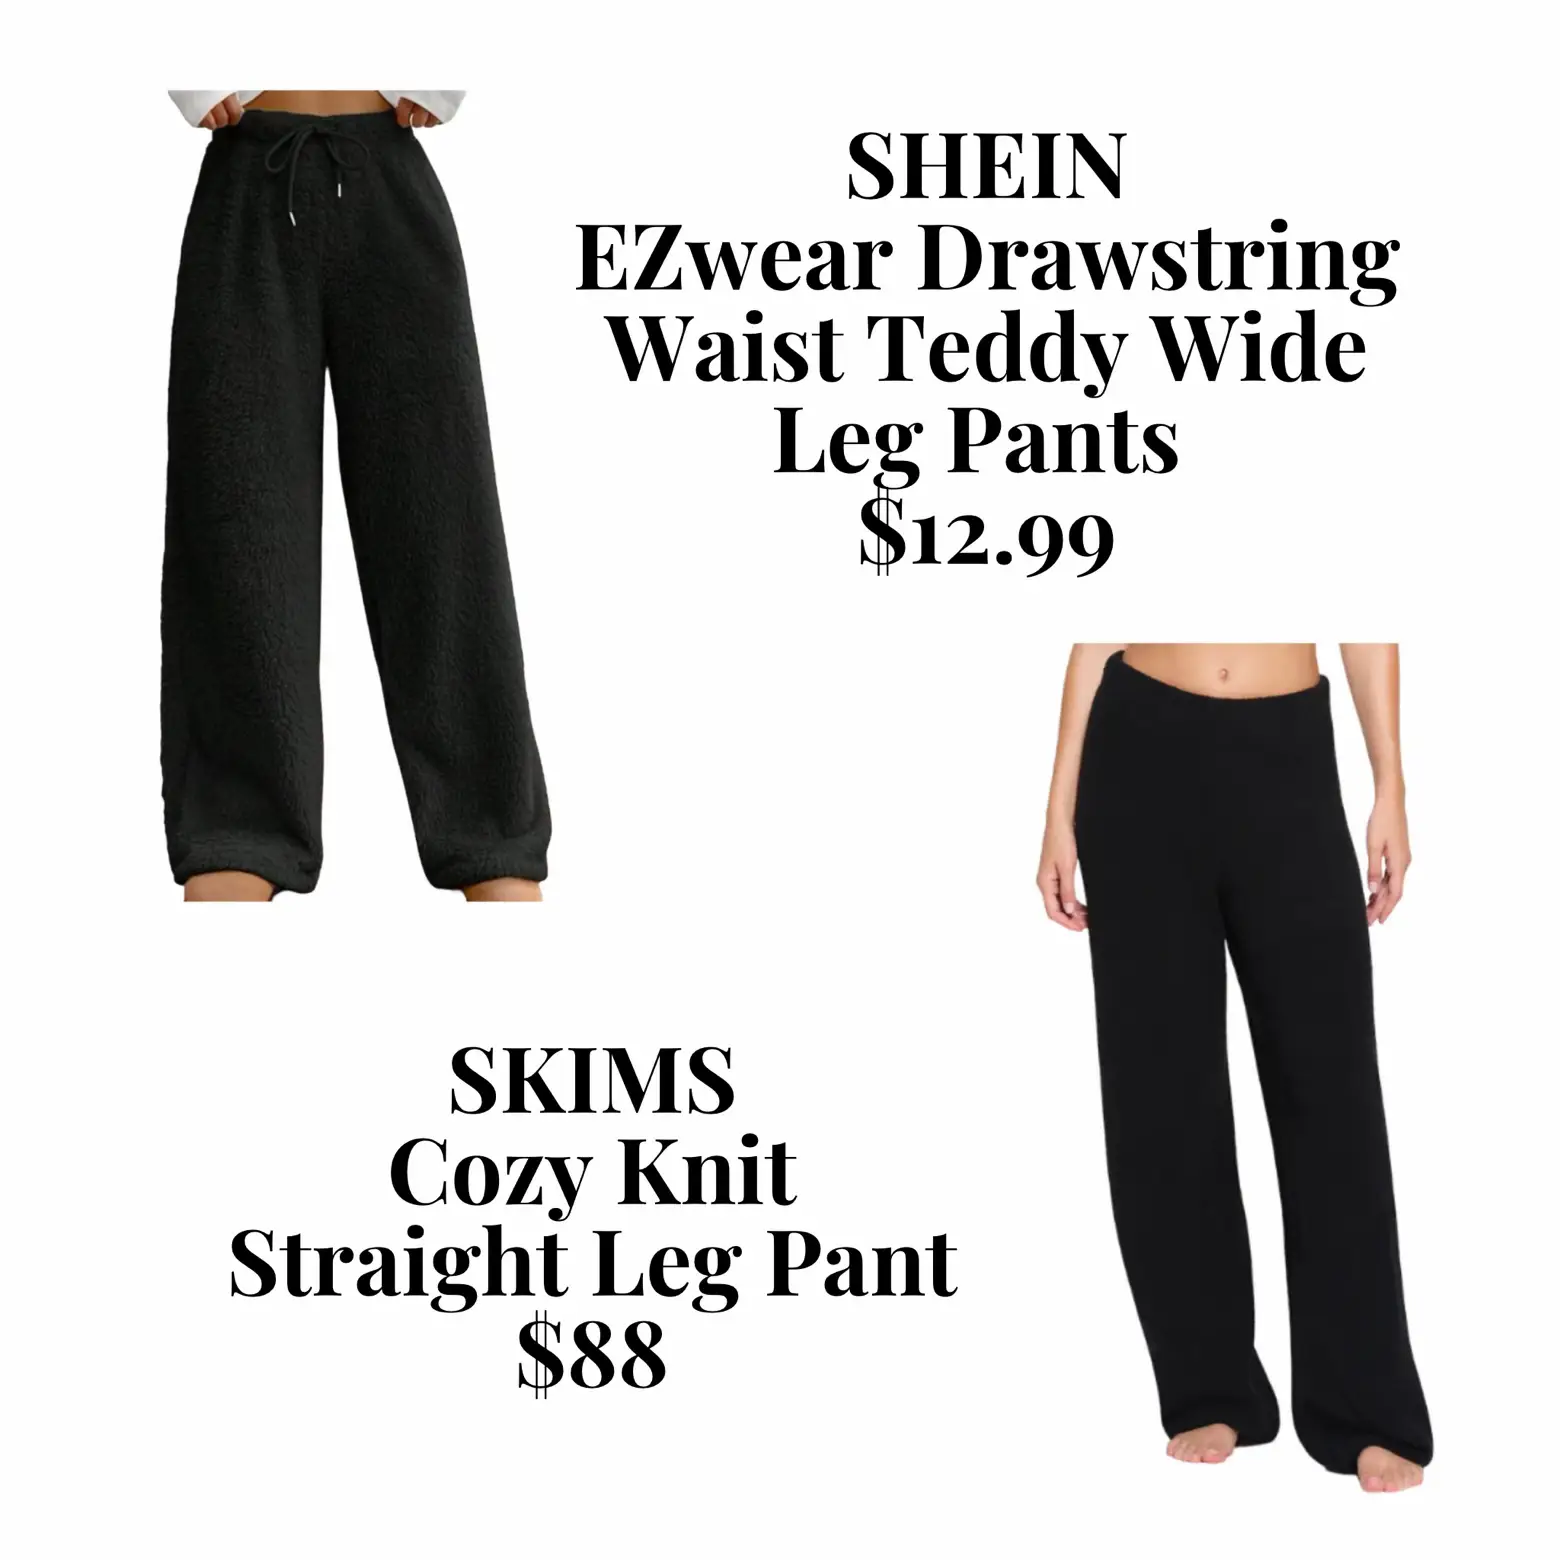 Skims dupes on Shein 🖤, Gallery posted by Xoacrylic